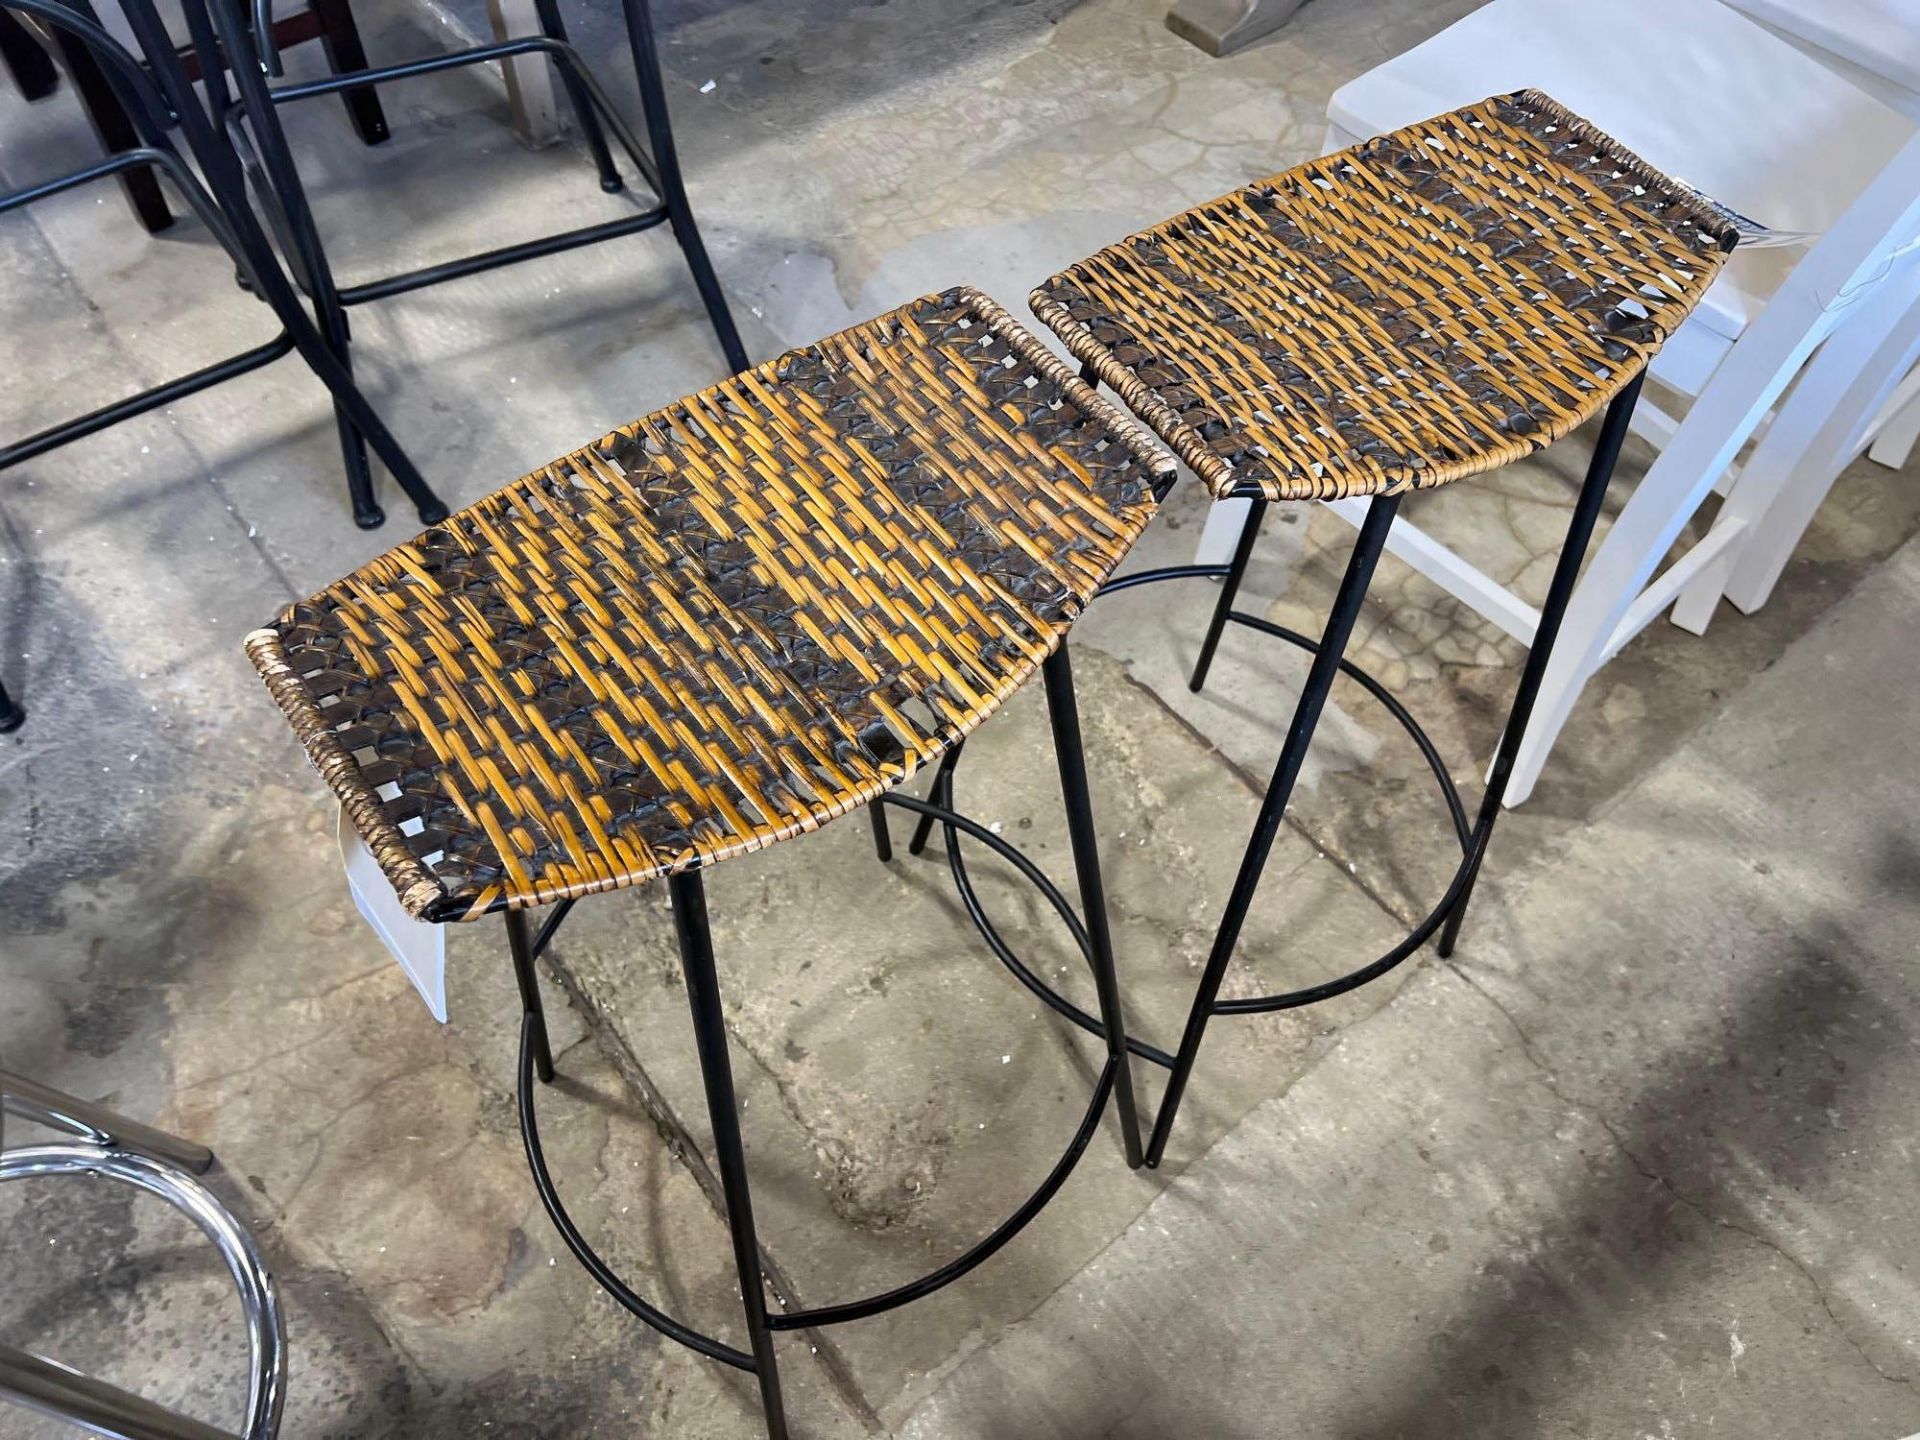 2 Wicker and Metal Stools - Image 3 of 3